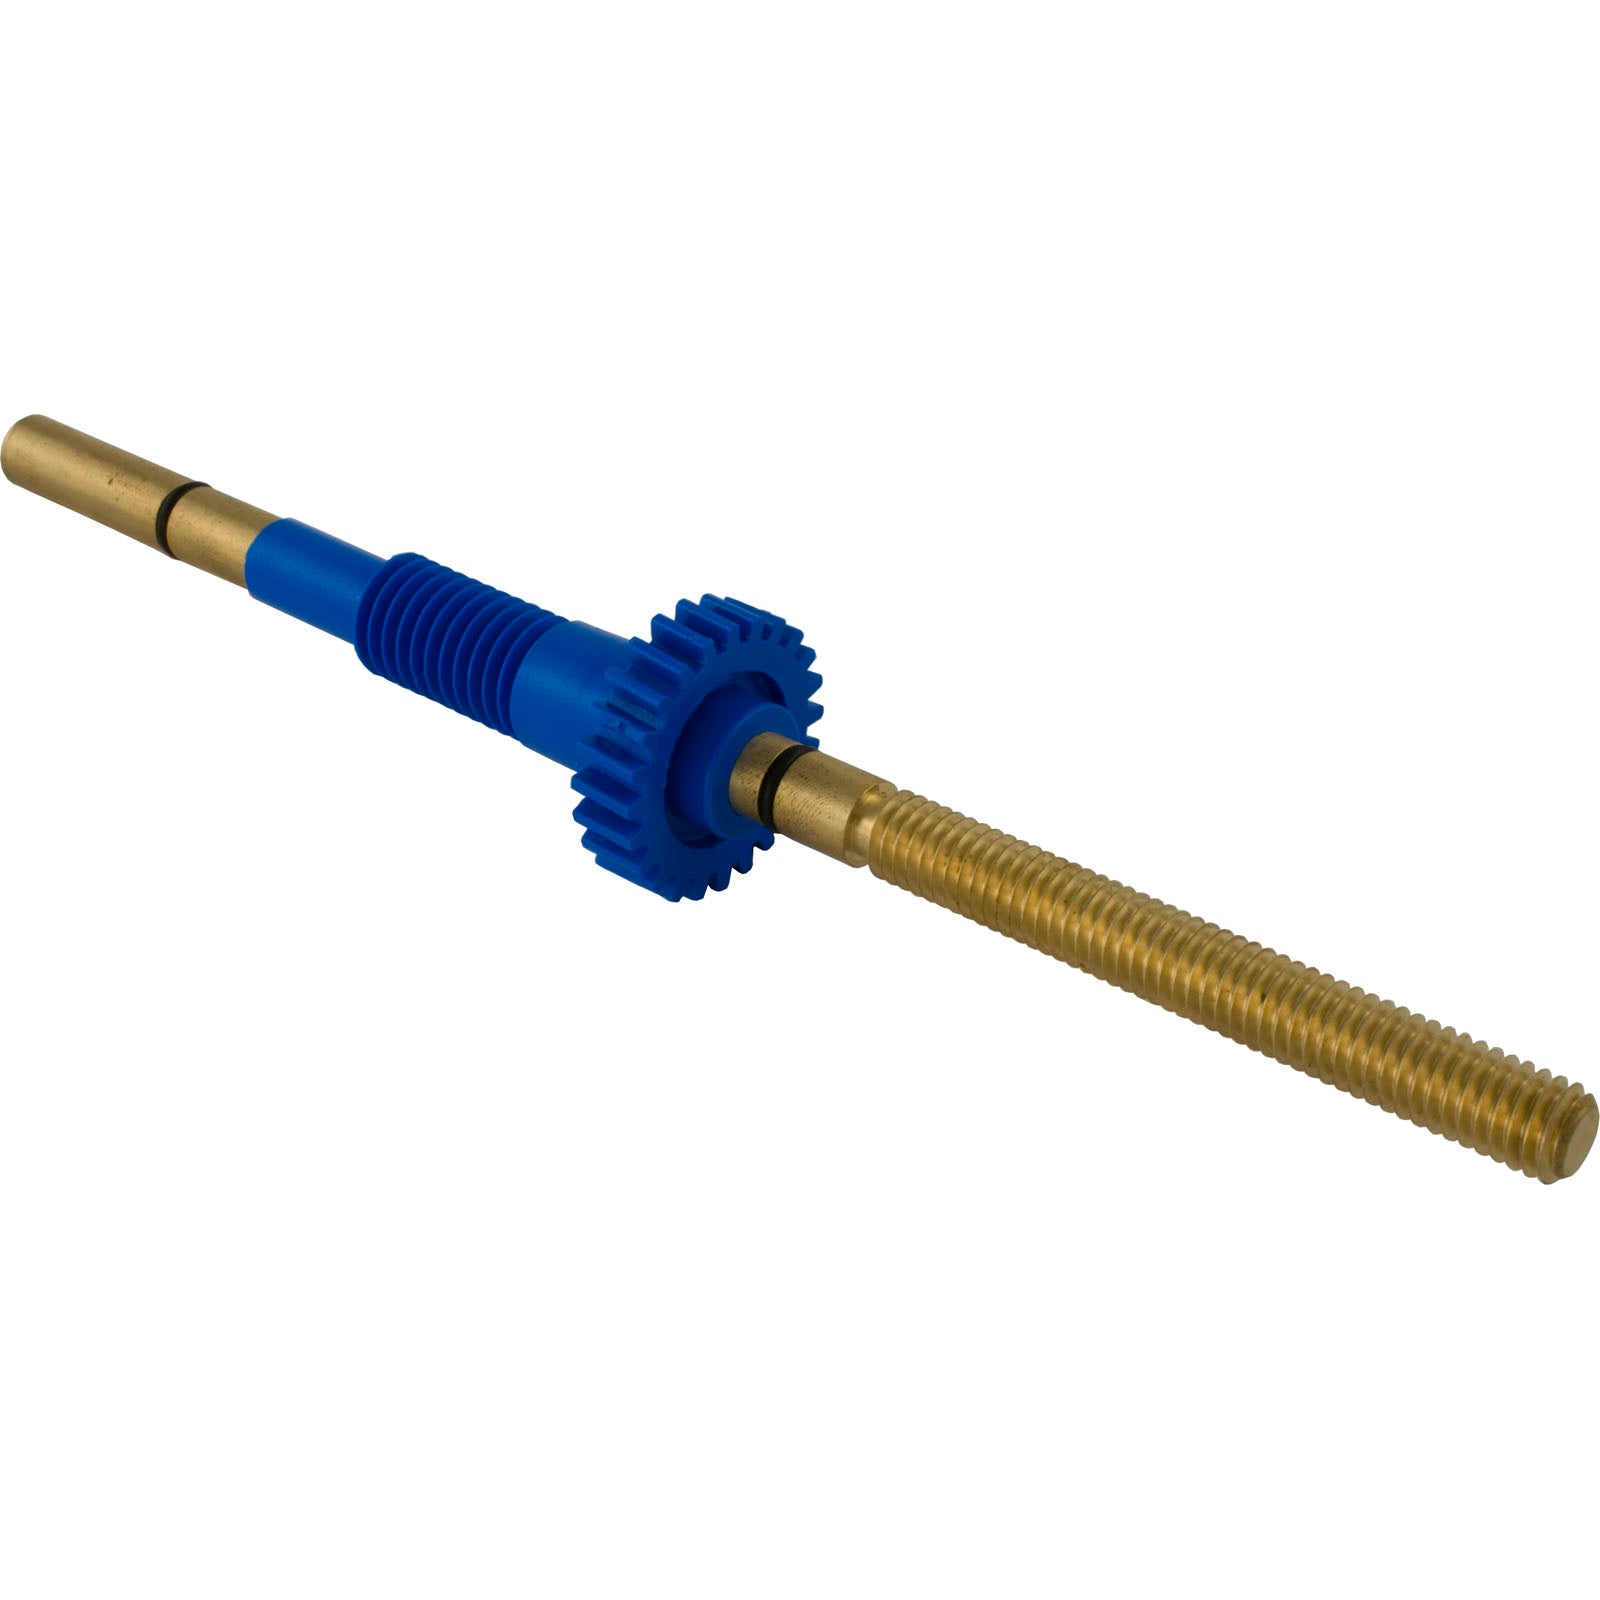 Gear Axle, Pentair L79BL Cleaner, with Tile Rinser- LG26L